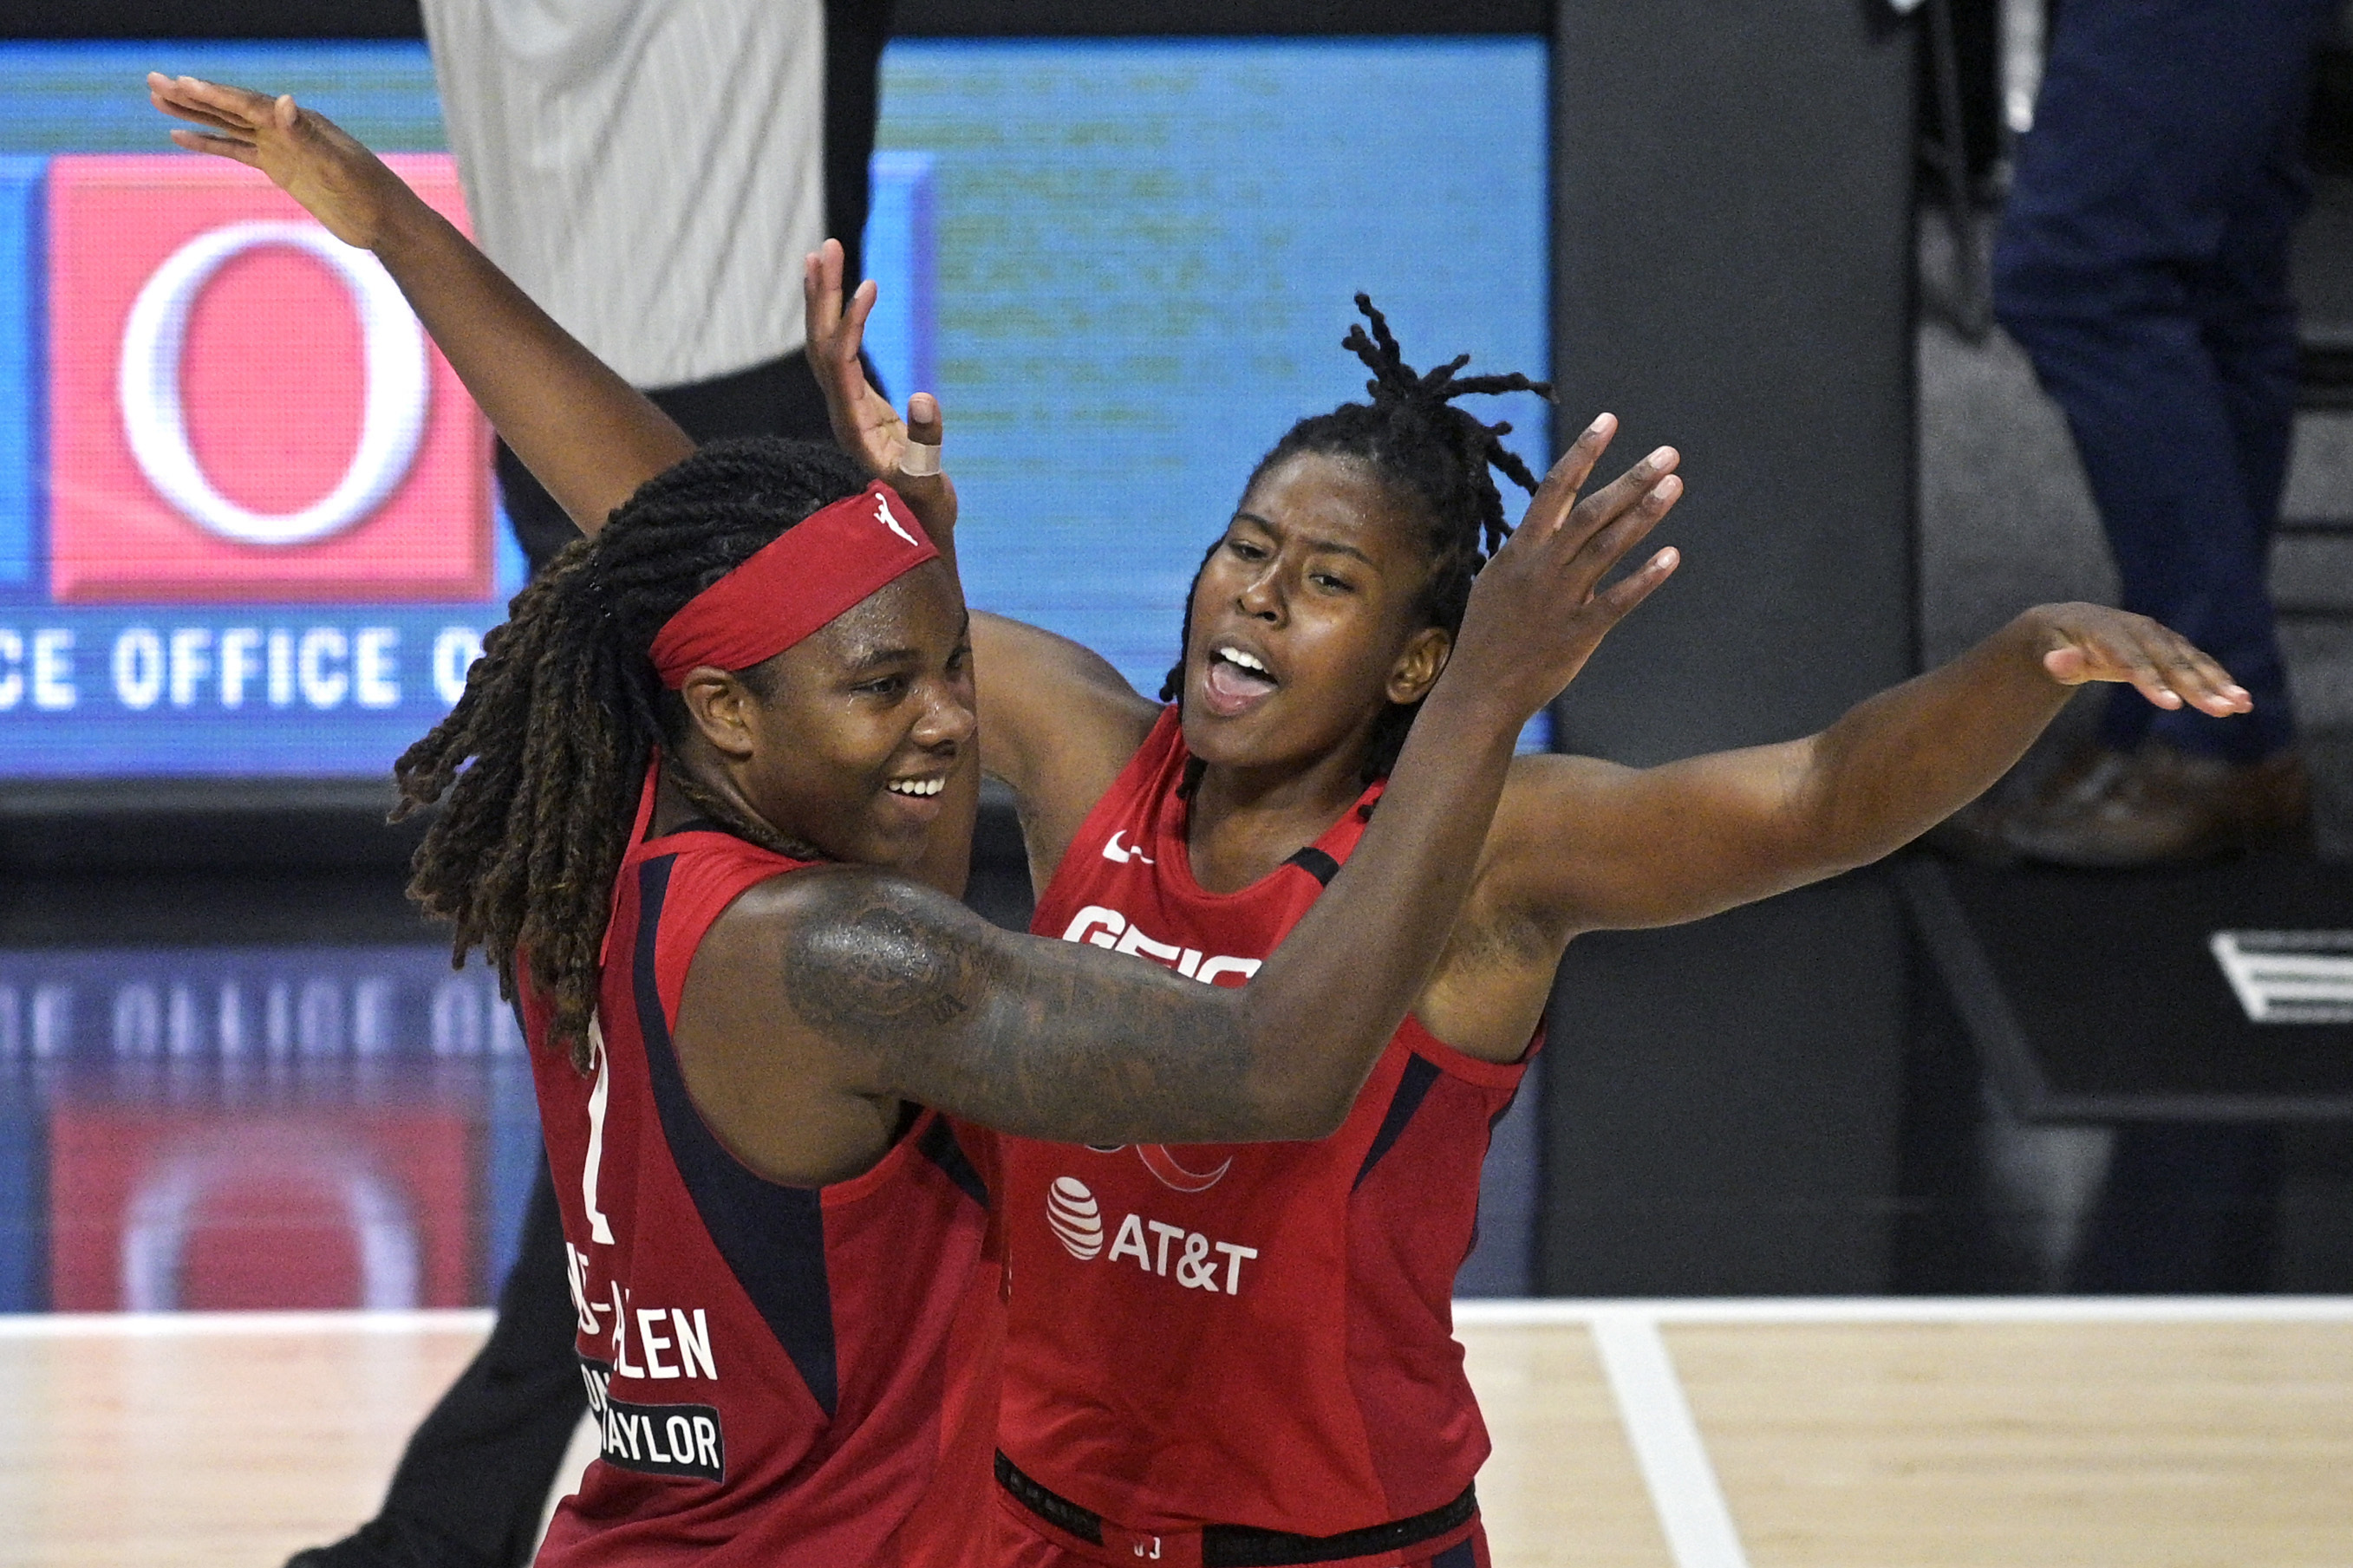 WNBA Playoff Bracket 2020 Full Schedule and Matchups for Entire Postseason